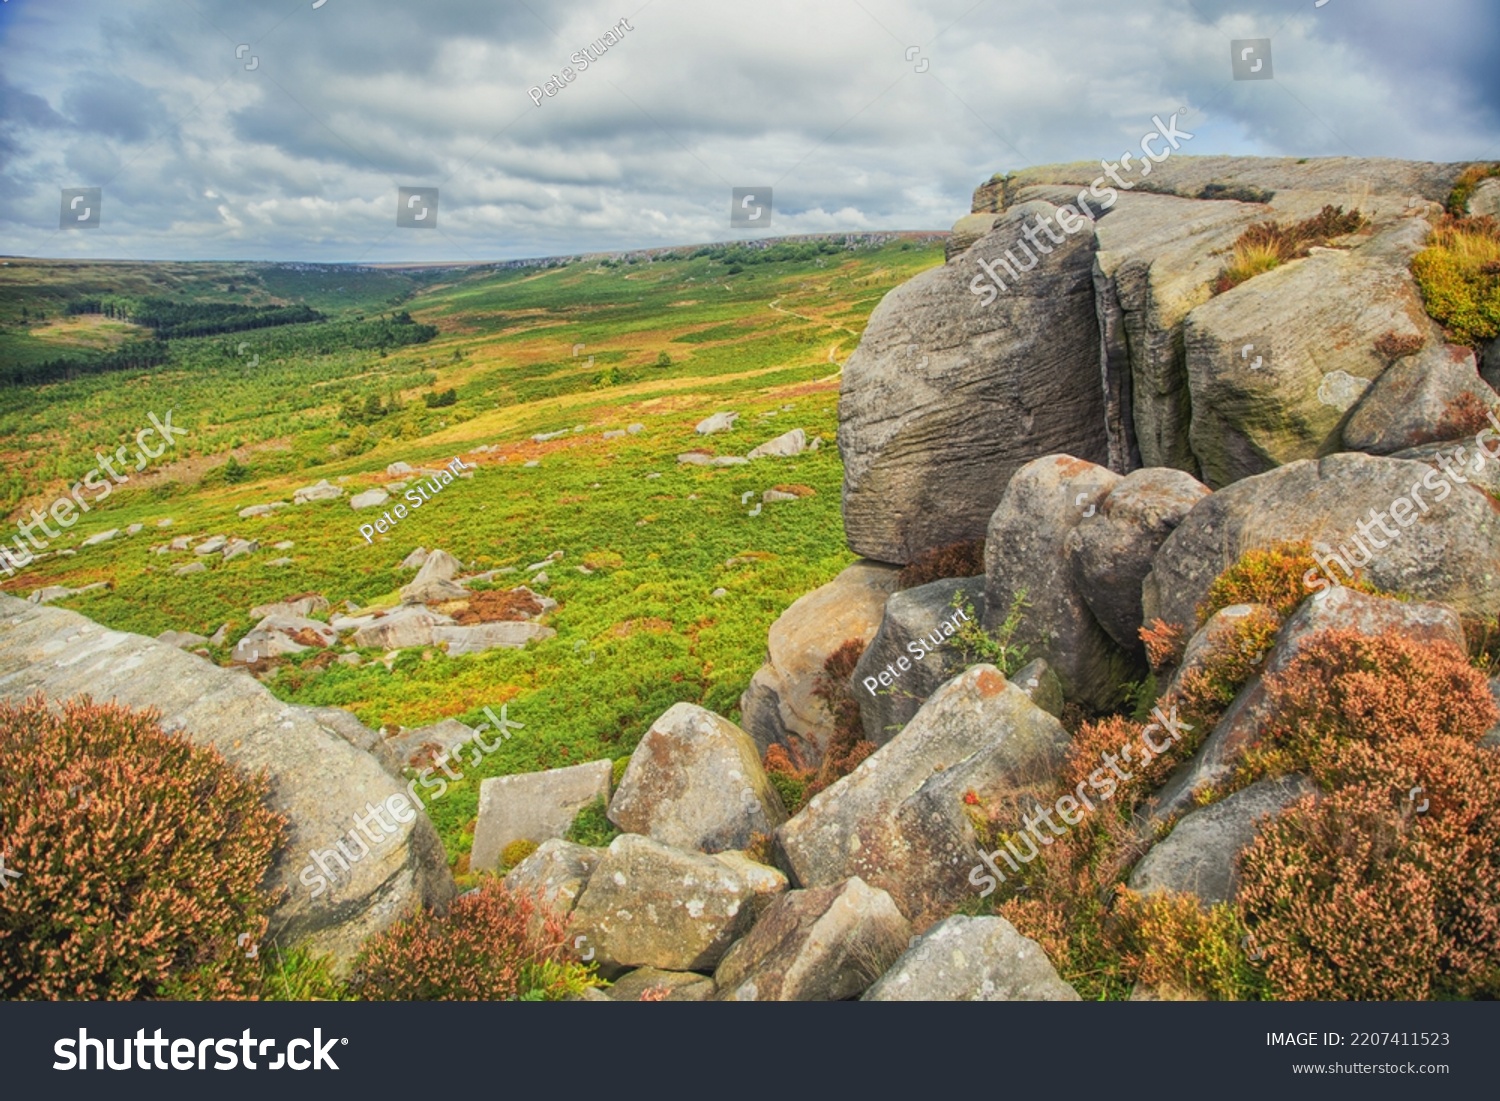 Burbage Edge is a gritstone escarpment overlooking the Burbage district of Buxton in Derbyshire, in the Peak District. The hill's summit is 500 metres above sea level.  #2207411523